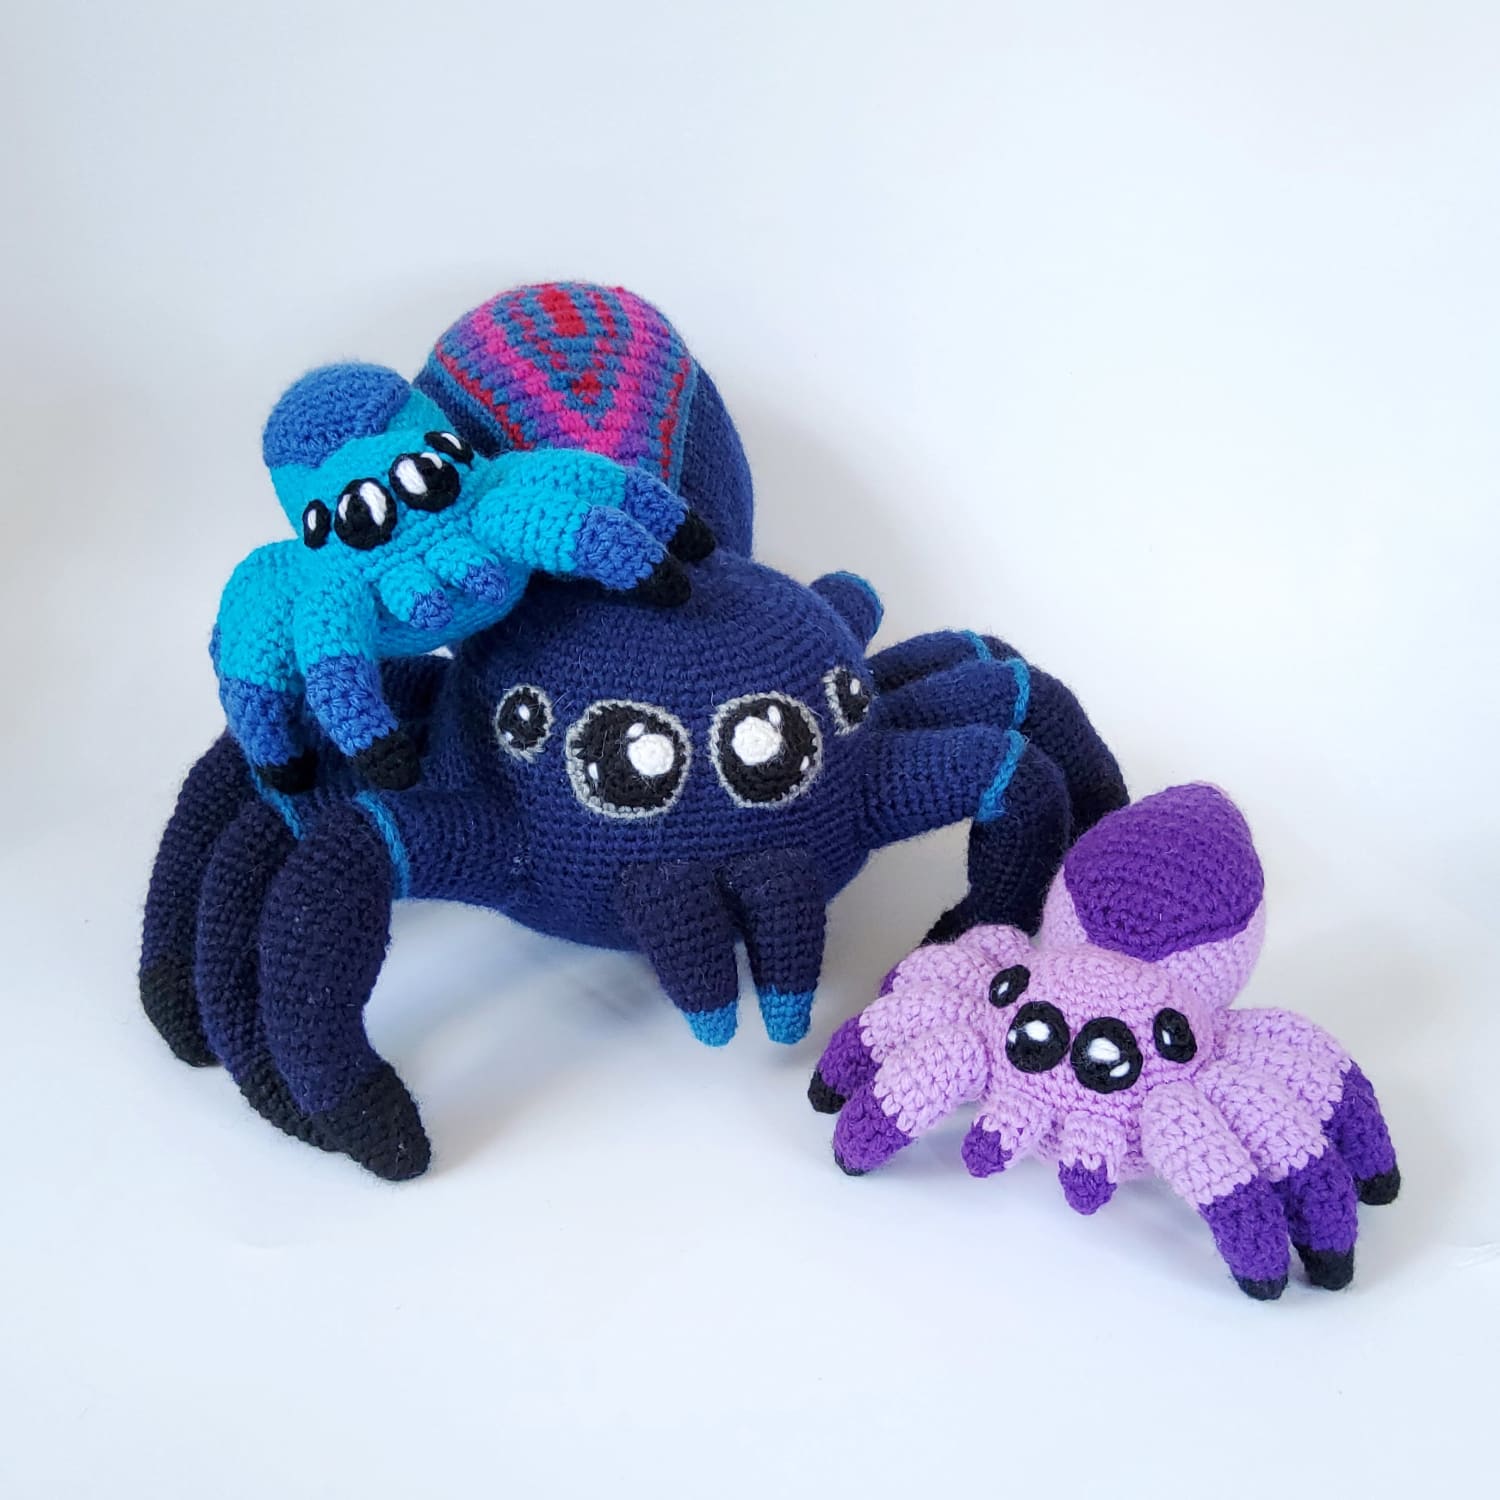 Hi! I'm new to Reddit and still figuring out how things work, but here are some of my crochet spiders.